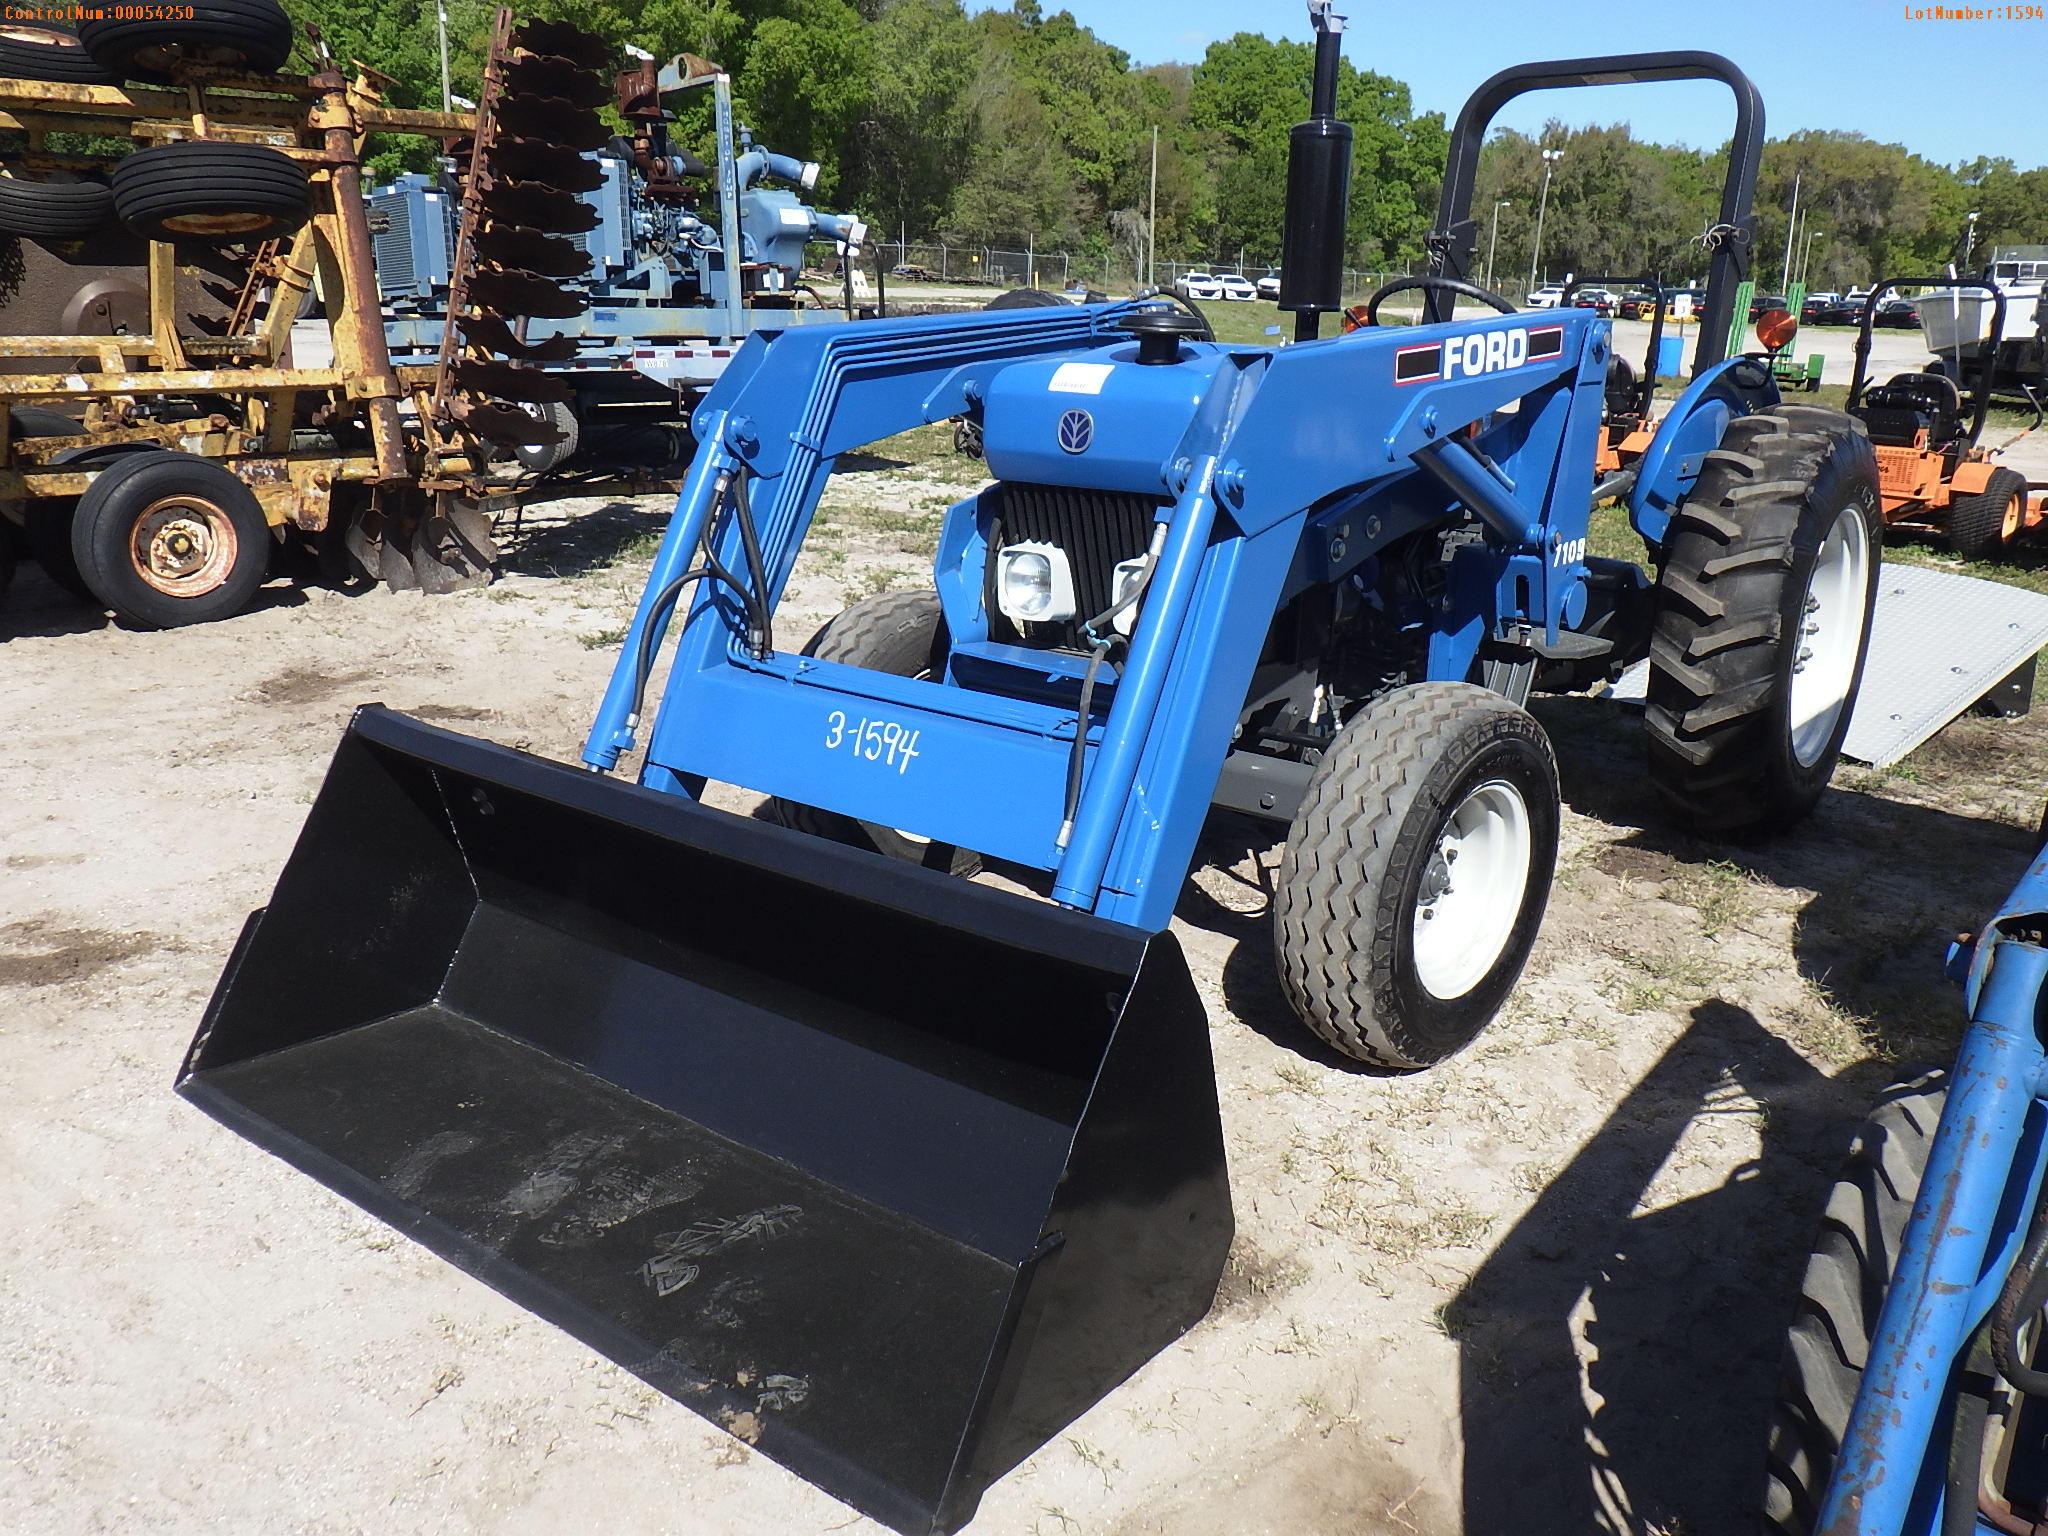 4-01142 (Equip.-Tractor)  Seller:Private/Dealer NEW HOLLAND 3430 OROPS TRACTOR L